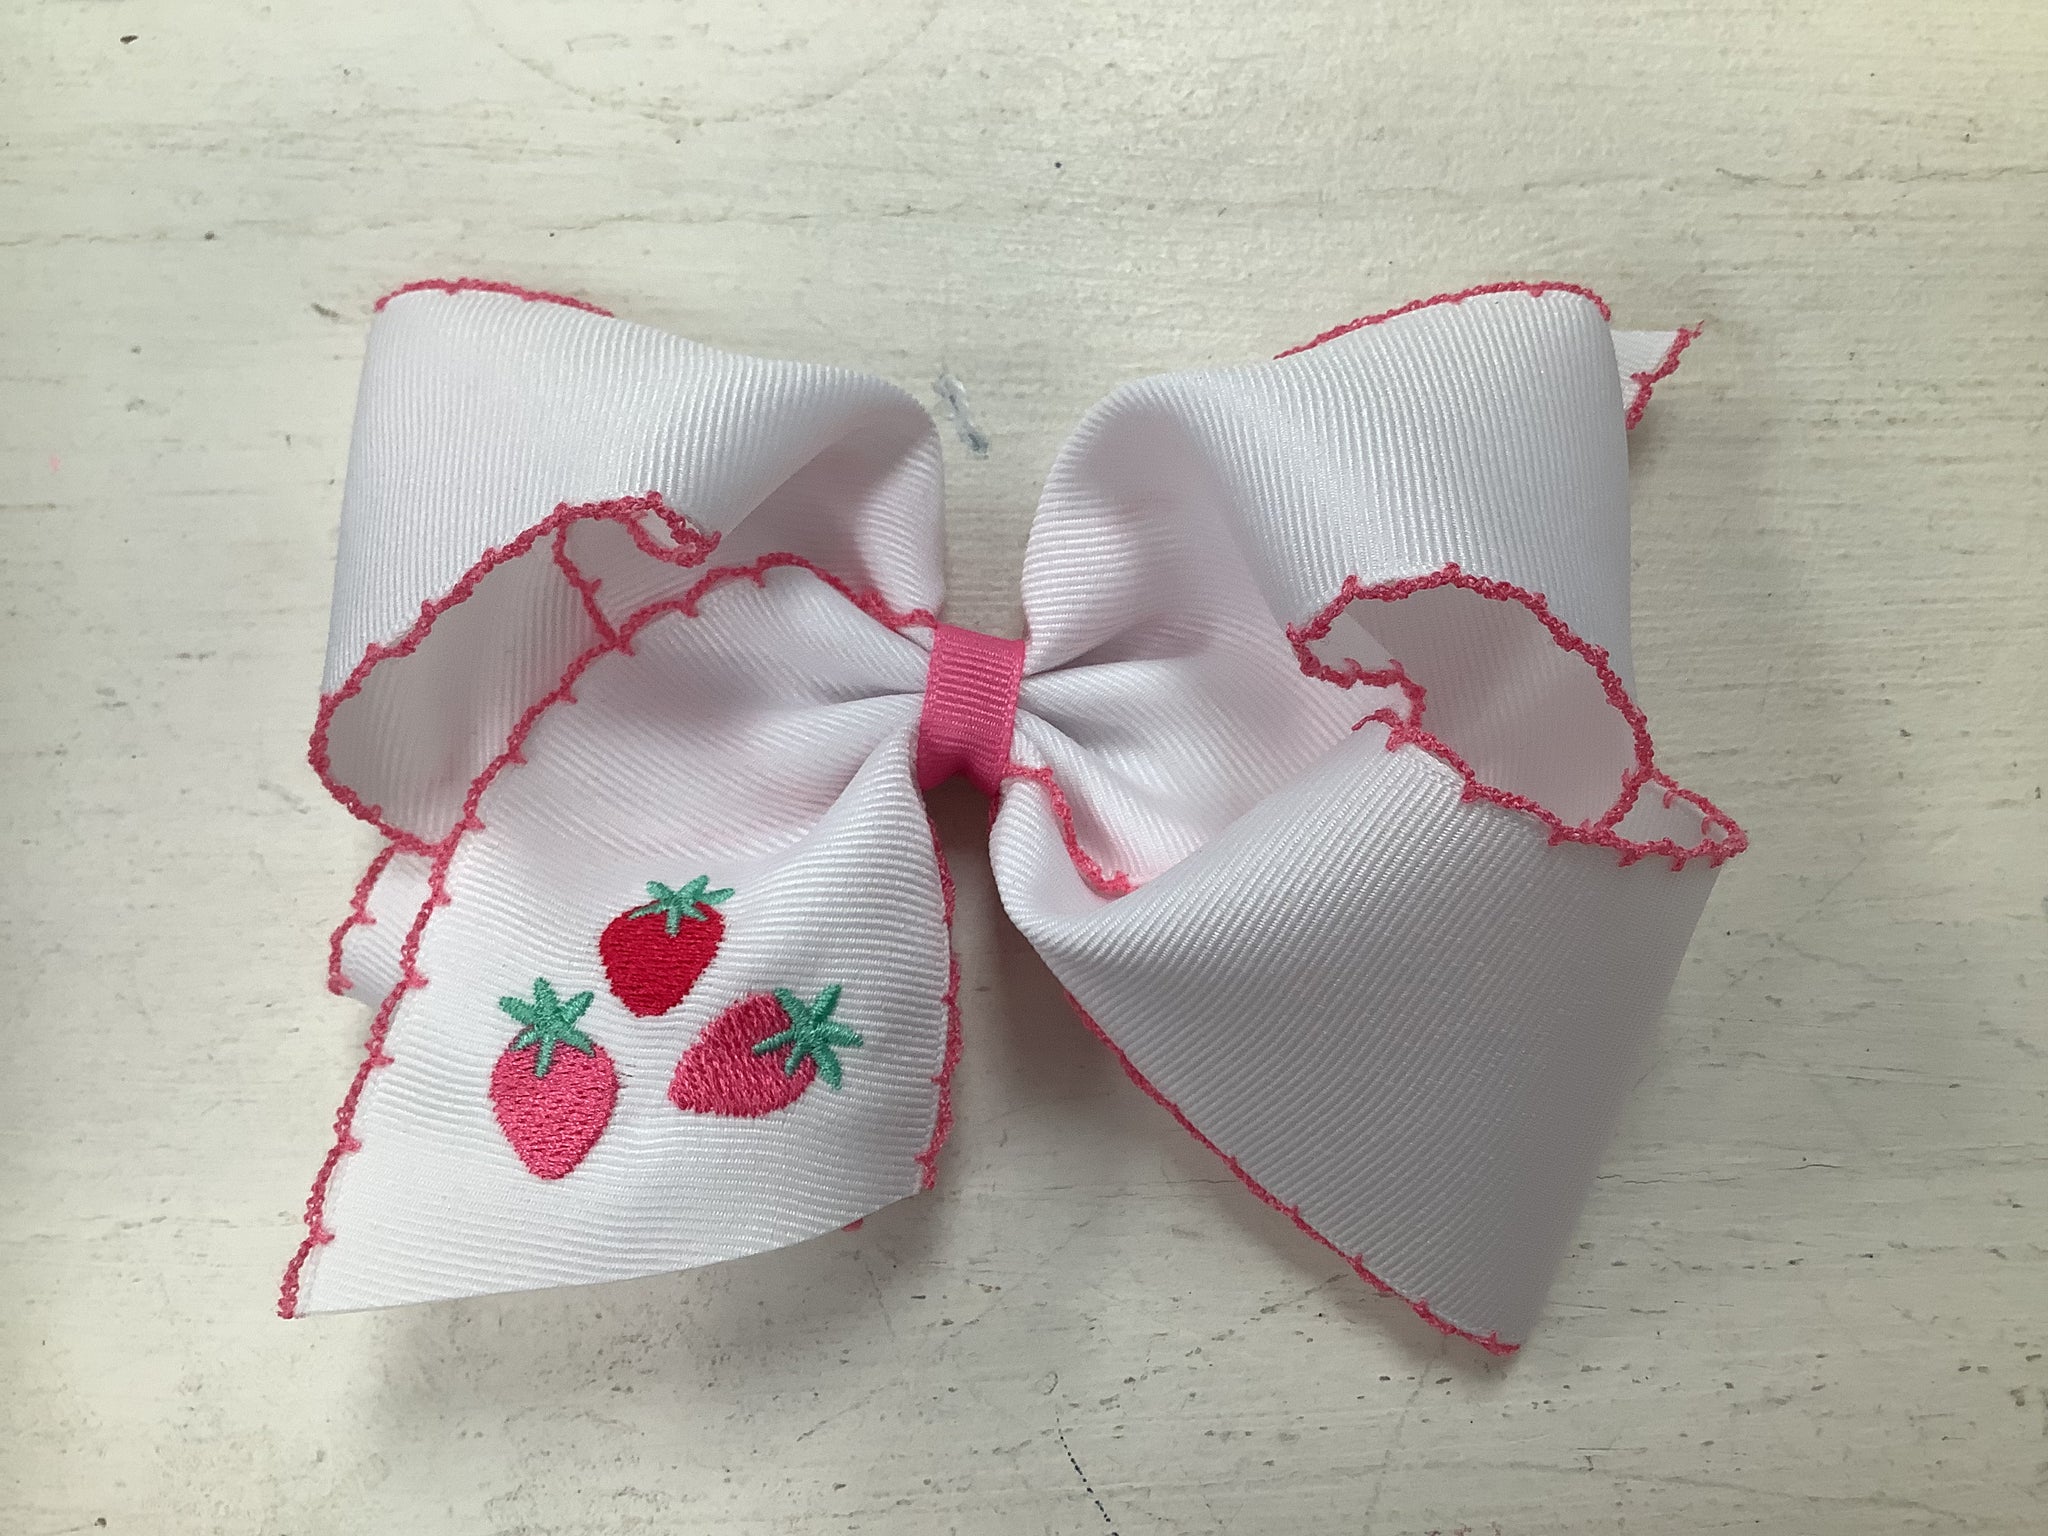 Wee Ones King Grosgrain Hair Bow with Moonstitch and Strawberry Embroidery